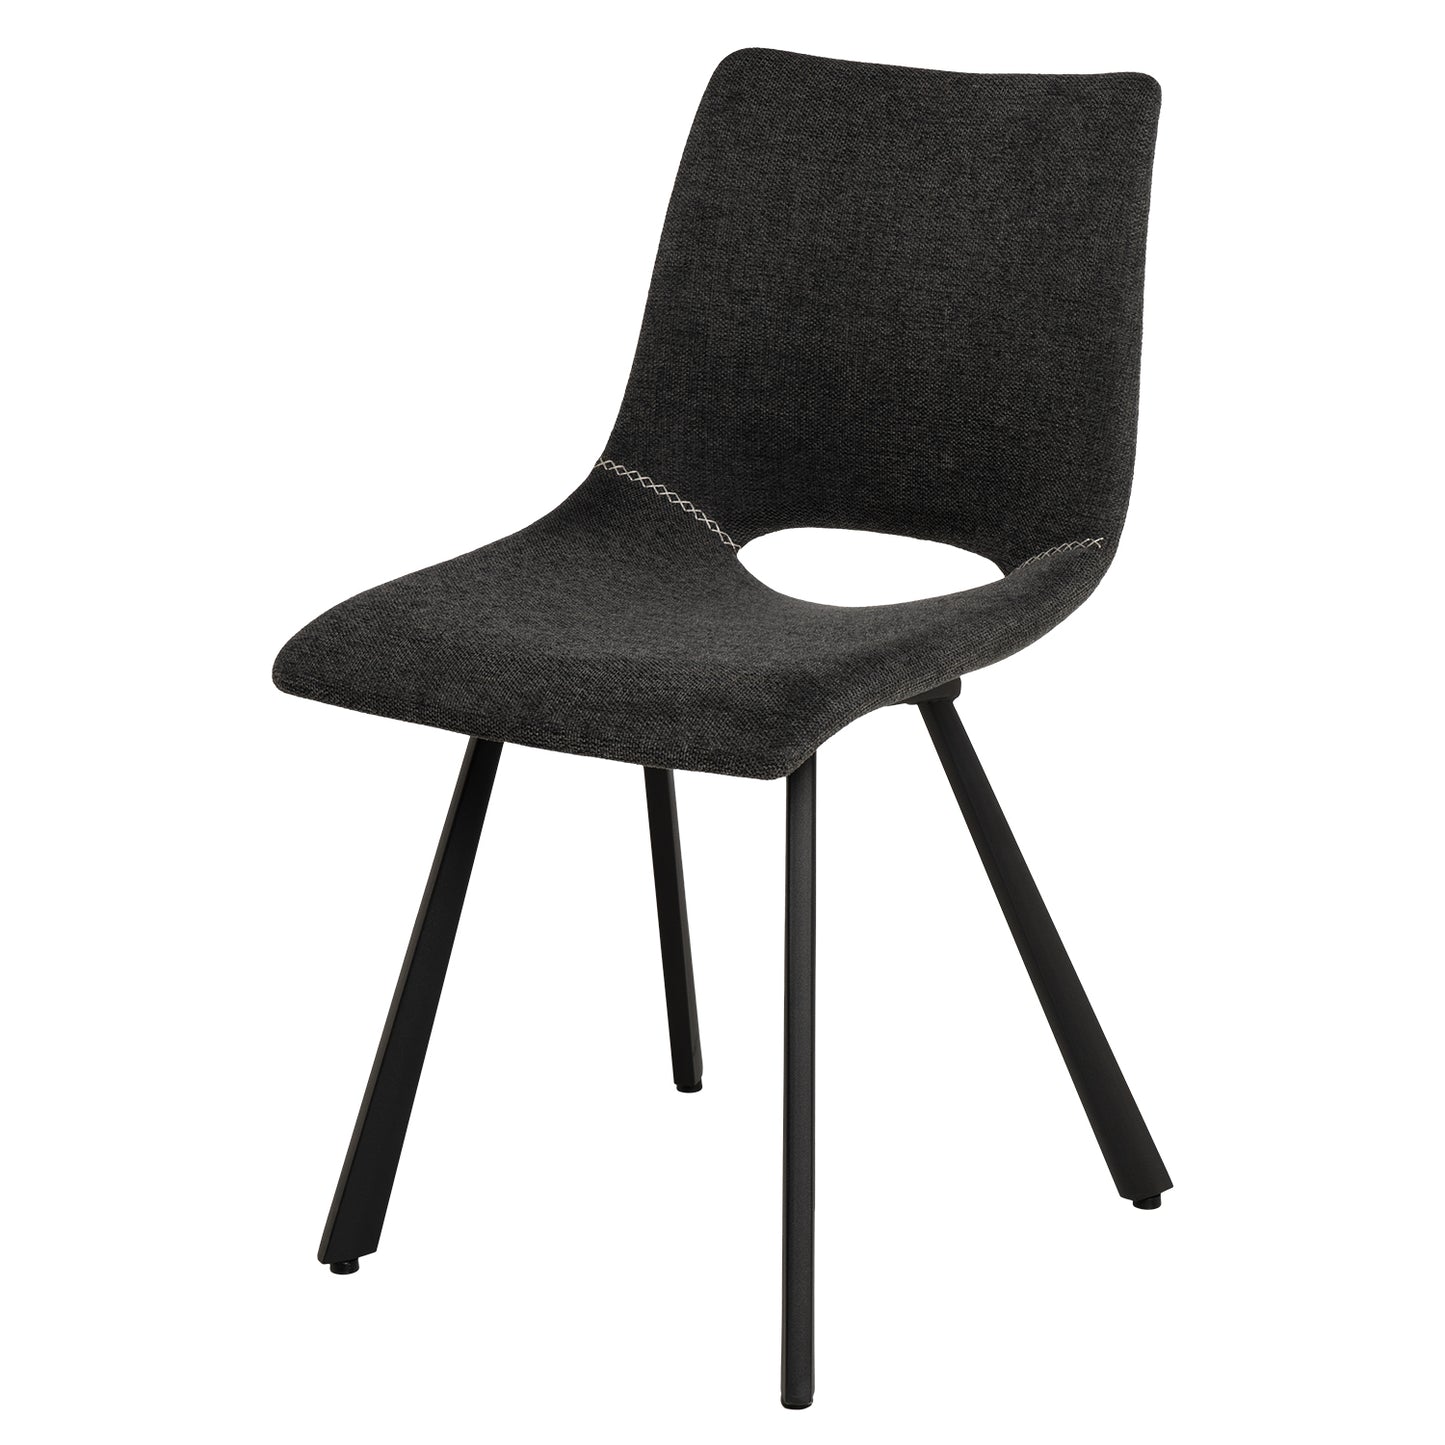 Briana dining chair